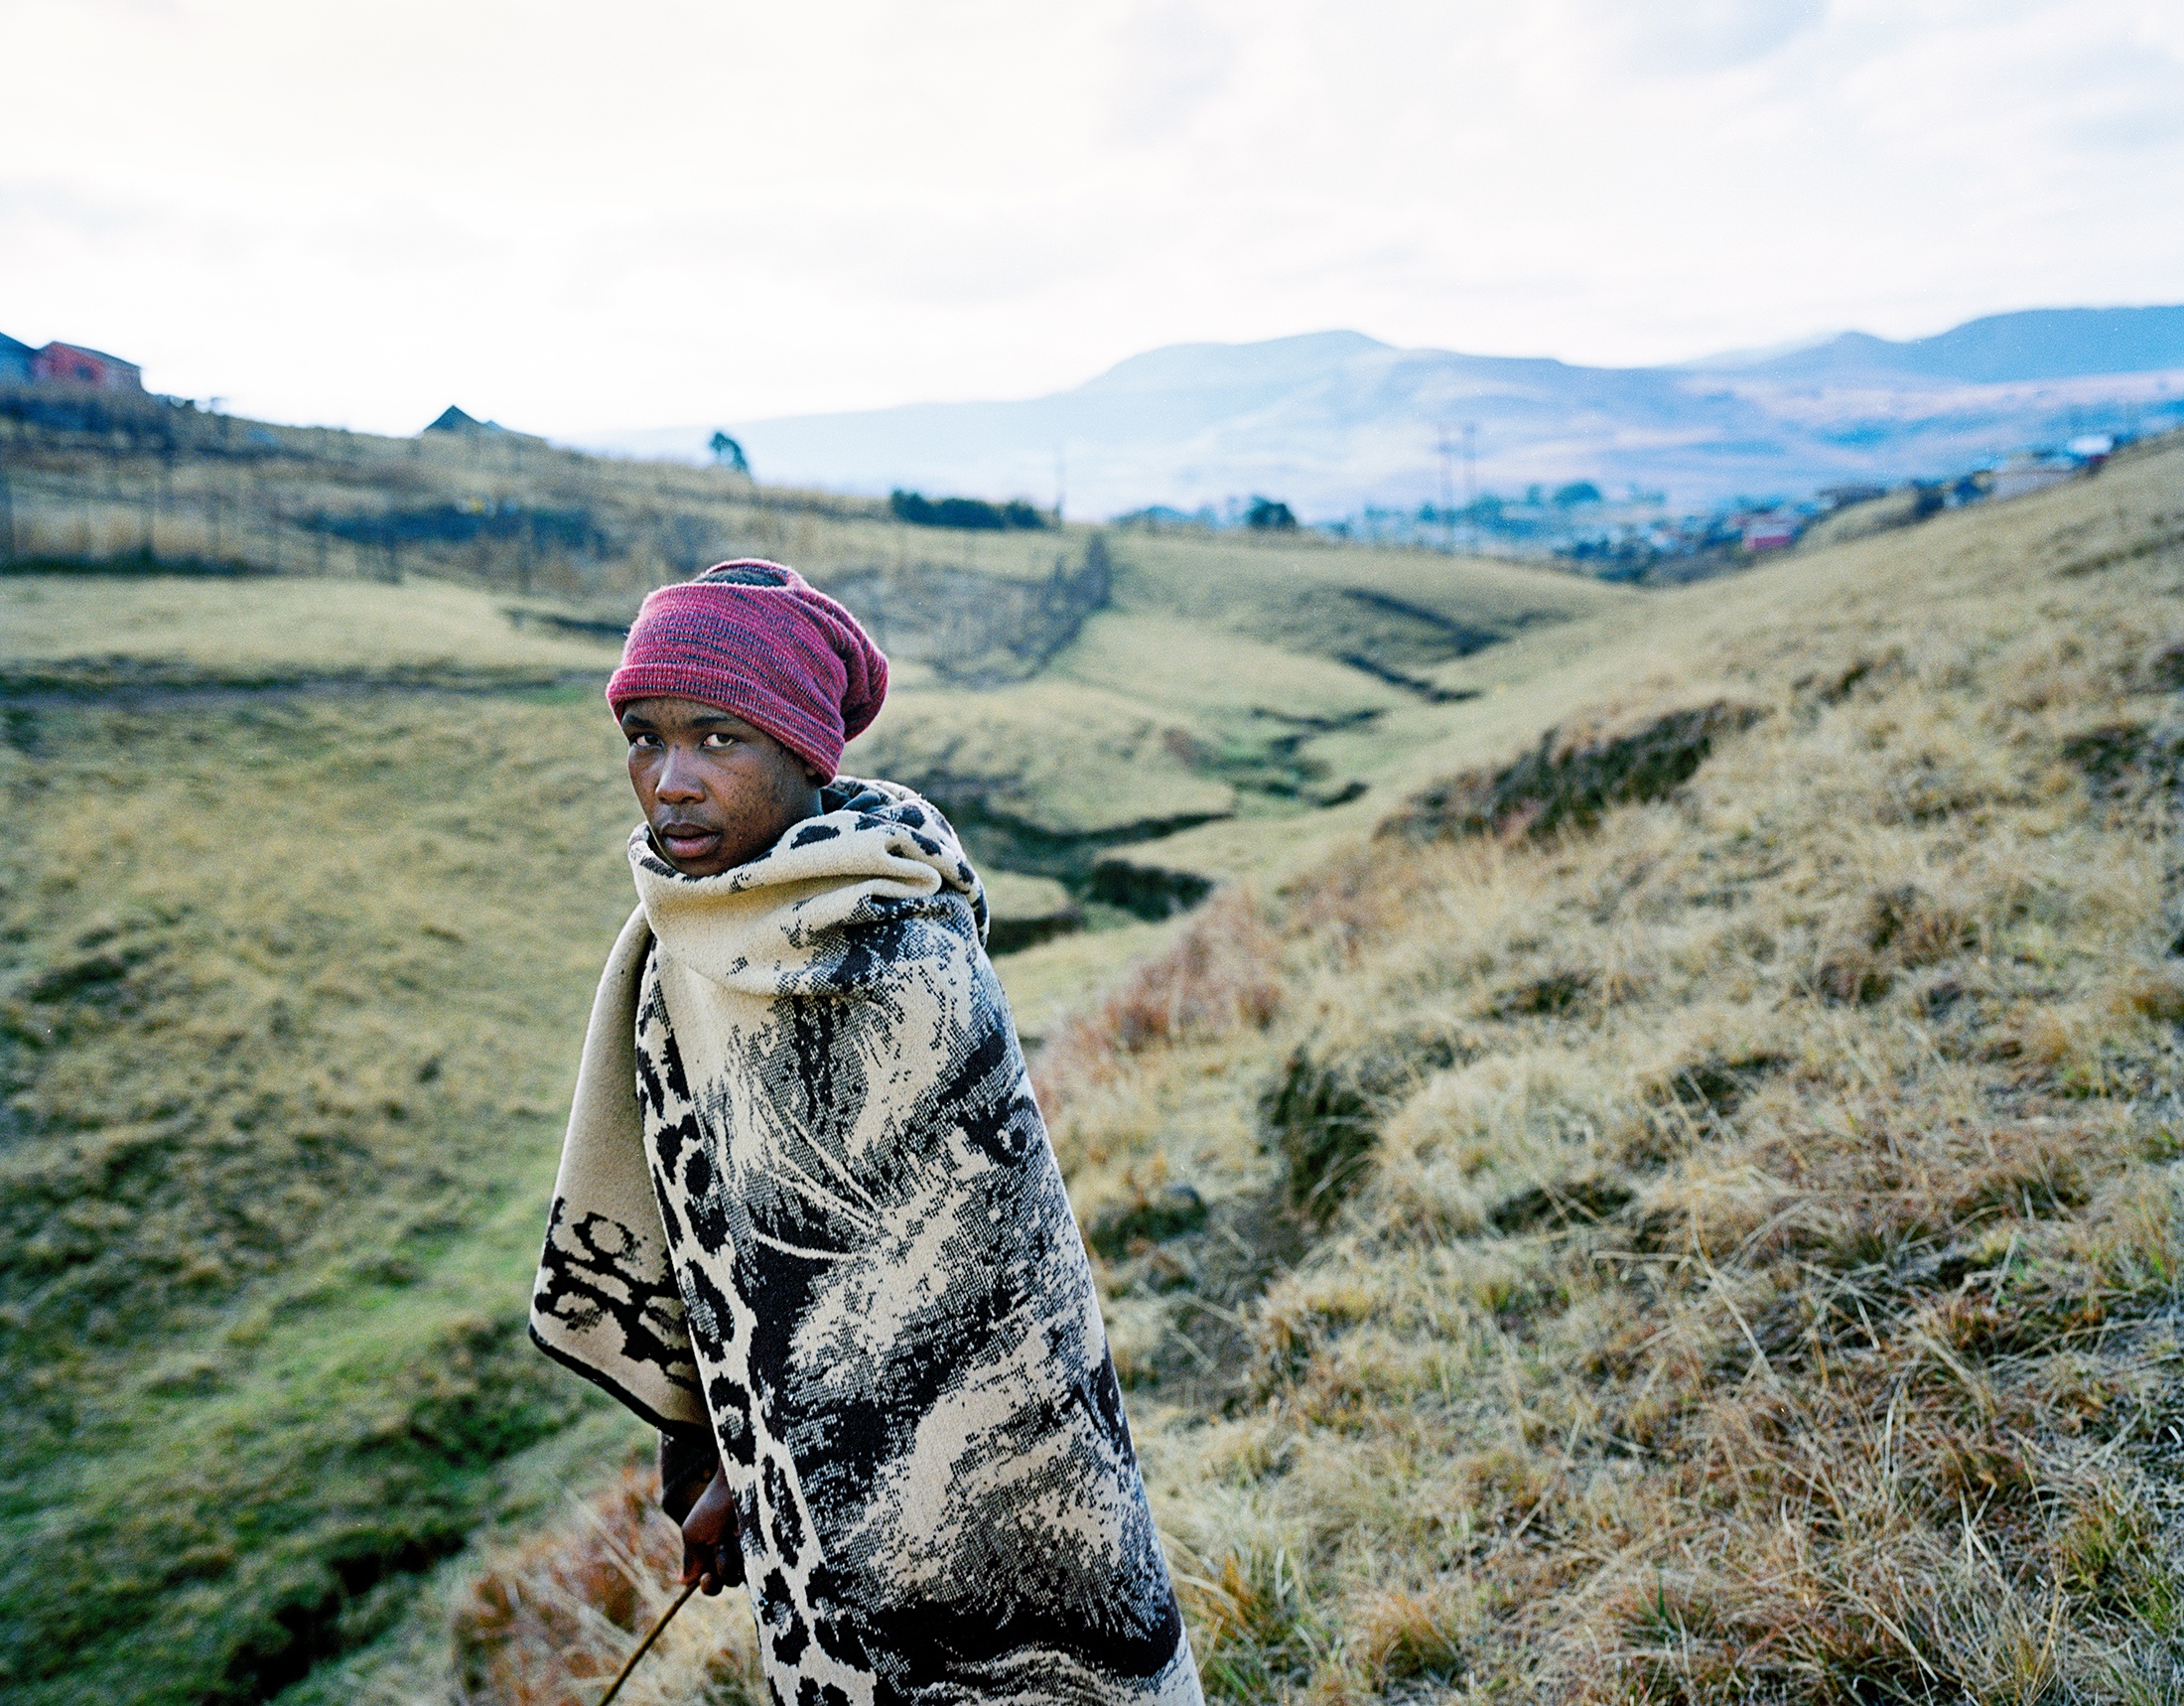 Lindokuhle Sobekwa's photograph 'Melusi wenkomo' shows an individual wrapped in a blanket standing in front of a grassy hillside.
